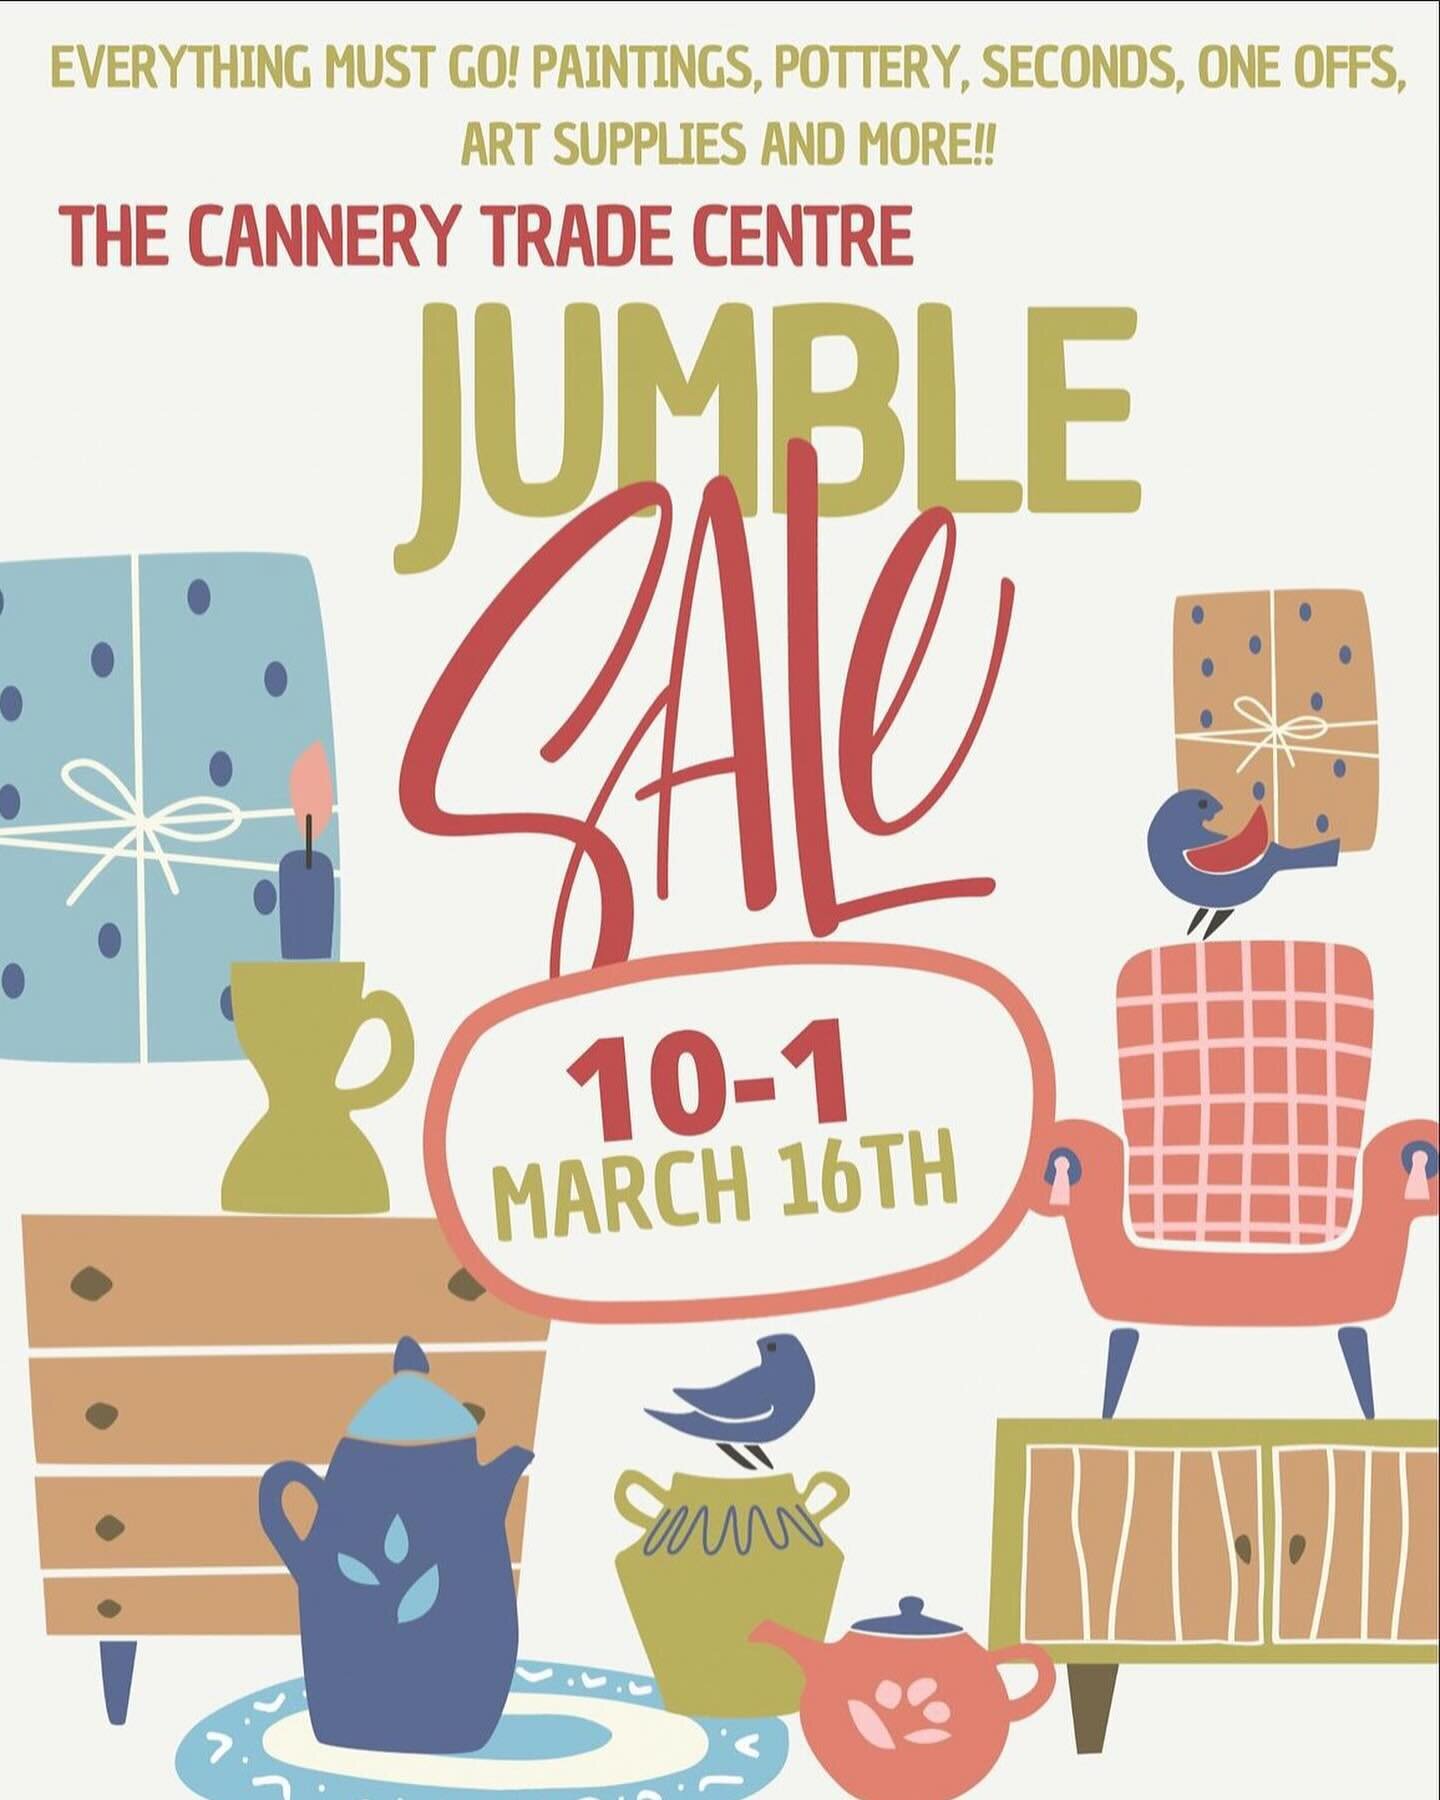 Find us in the halls @cannerytradecentre this Saturday March 16th. We are partnering with our neighbours @donuthousestudios on a big jumble sale. Like, Really Big. 

Frames, pottery, retro collectibles and more! 

We&rsquo;re doing this from 10 until